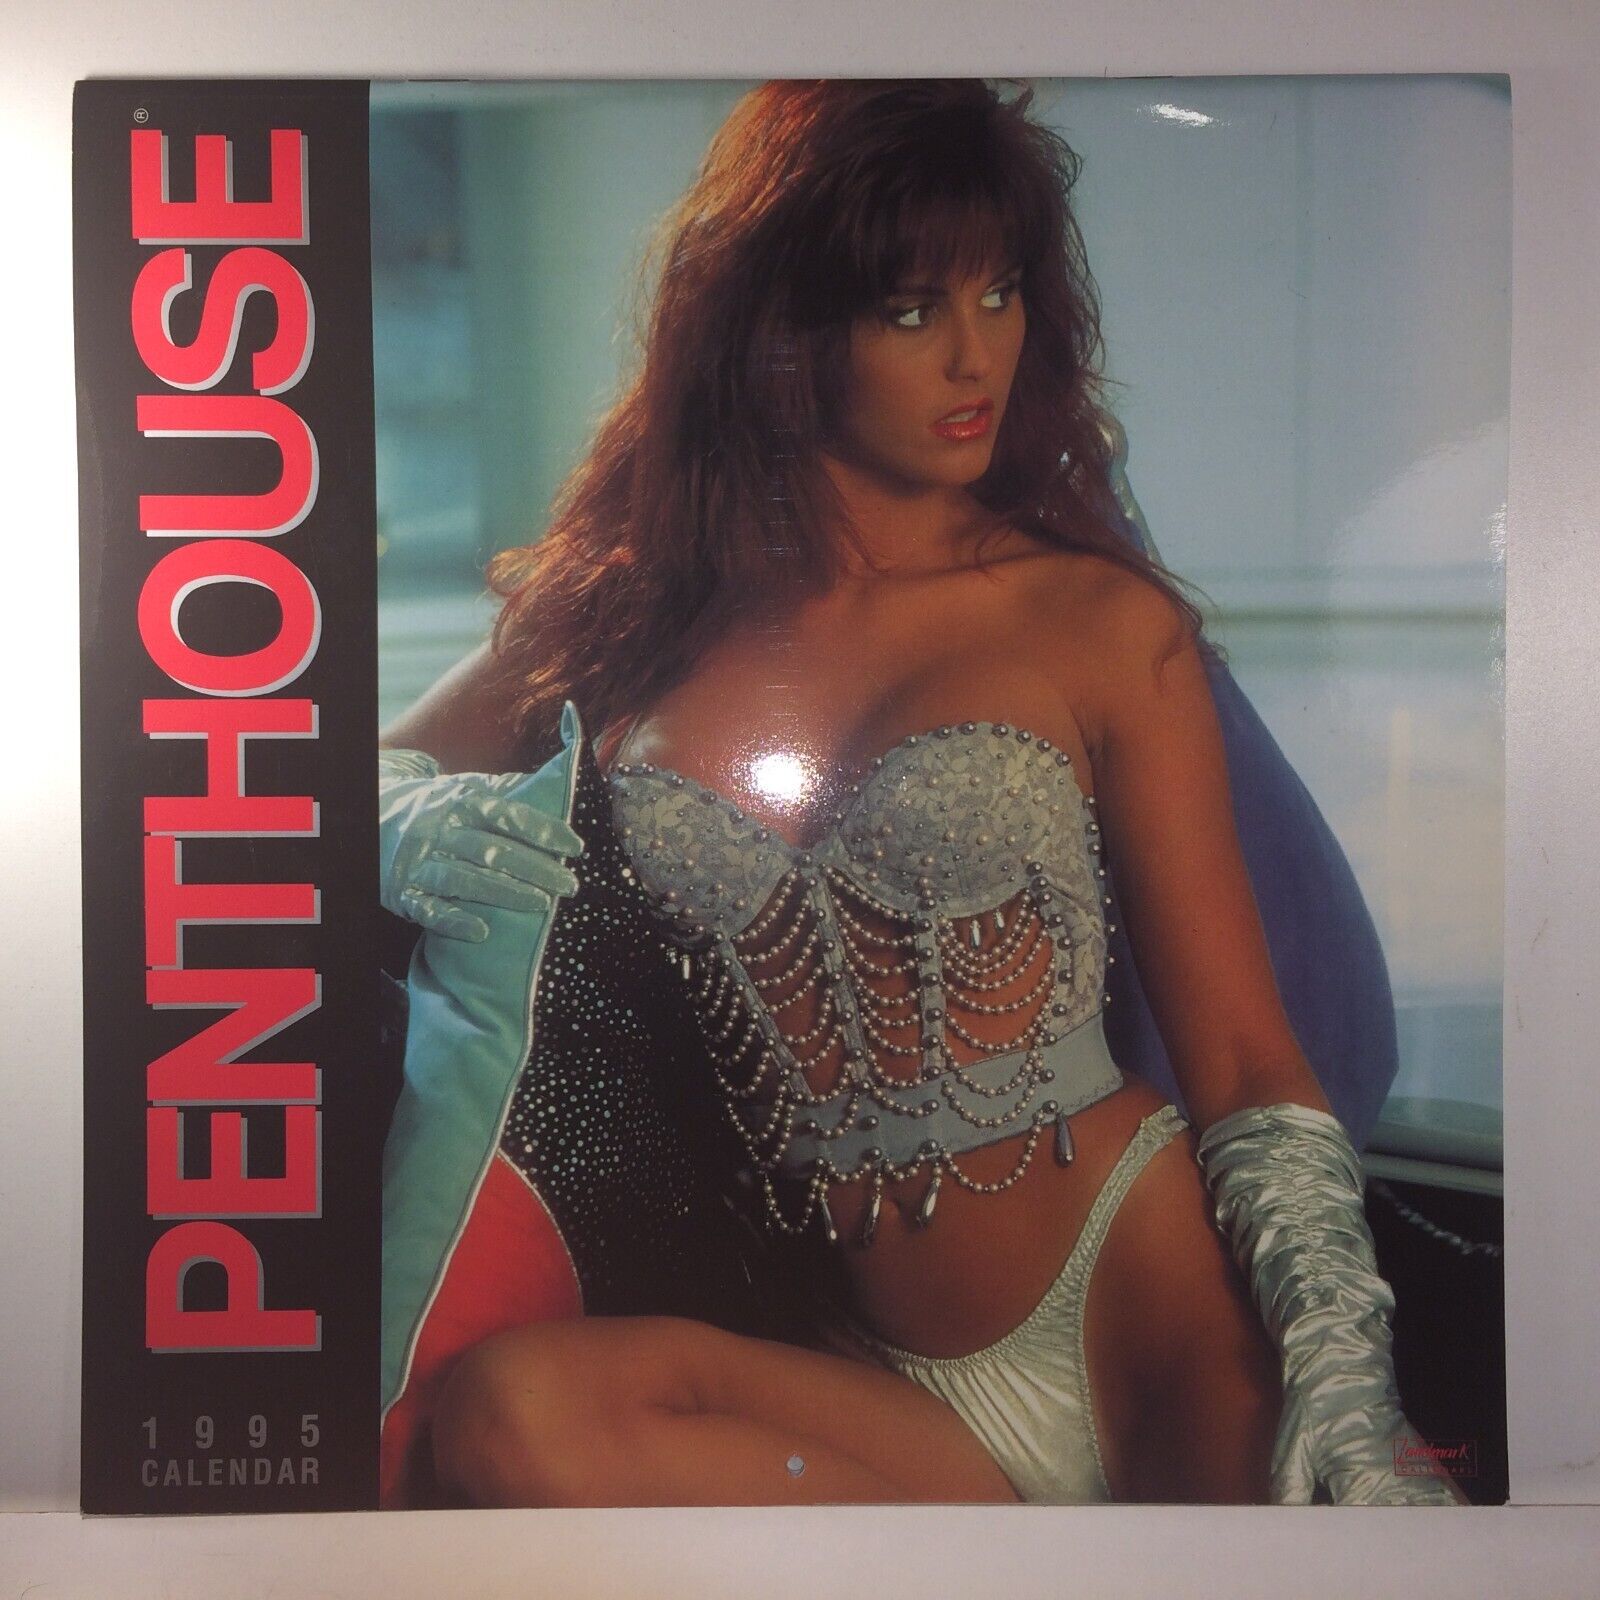 Pent house Wall Calendar 1995 - COMBINED SHIPPING ON ALL ITEMS